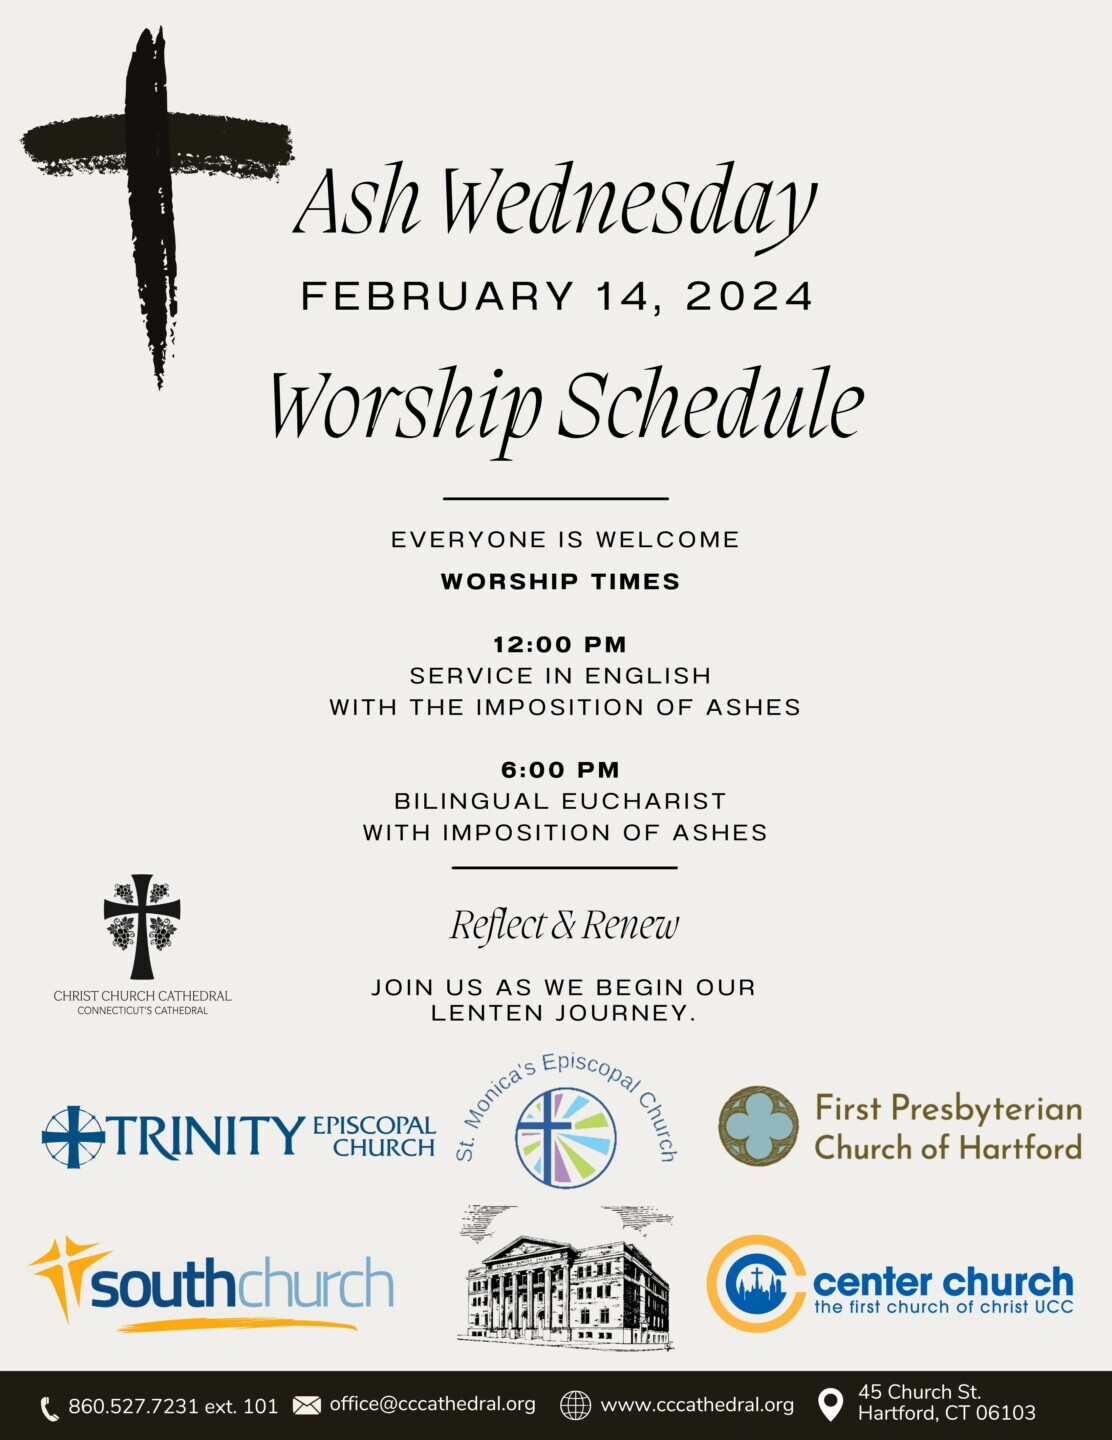 Ash Wednesday~ service in English with the imposition of ashes